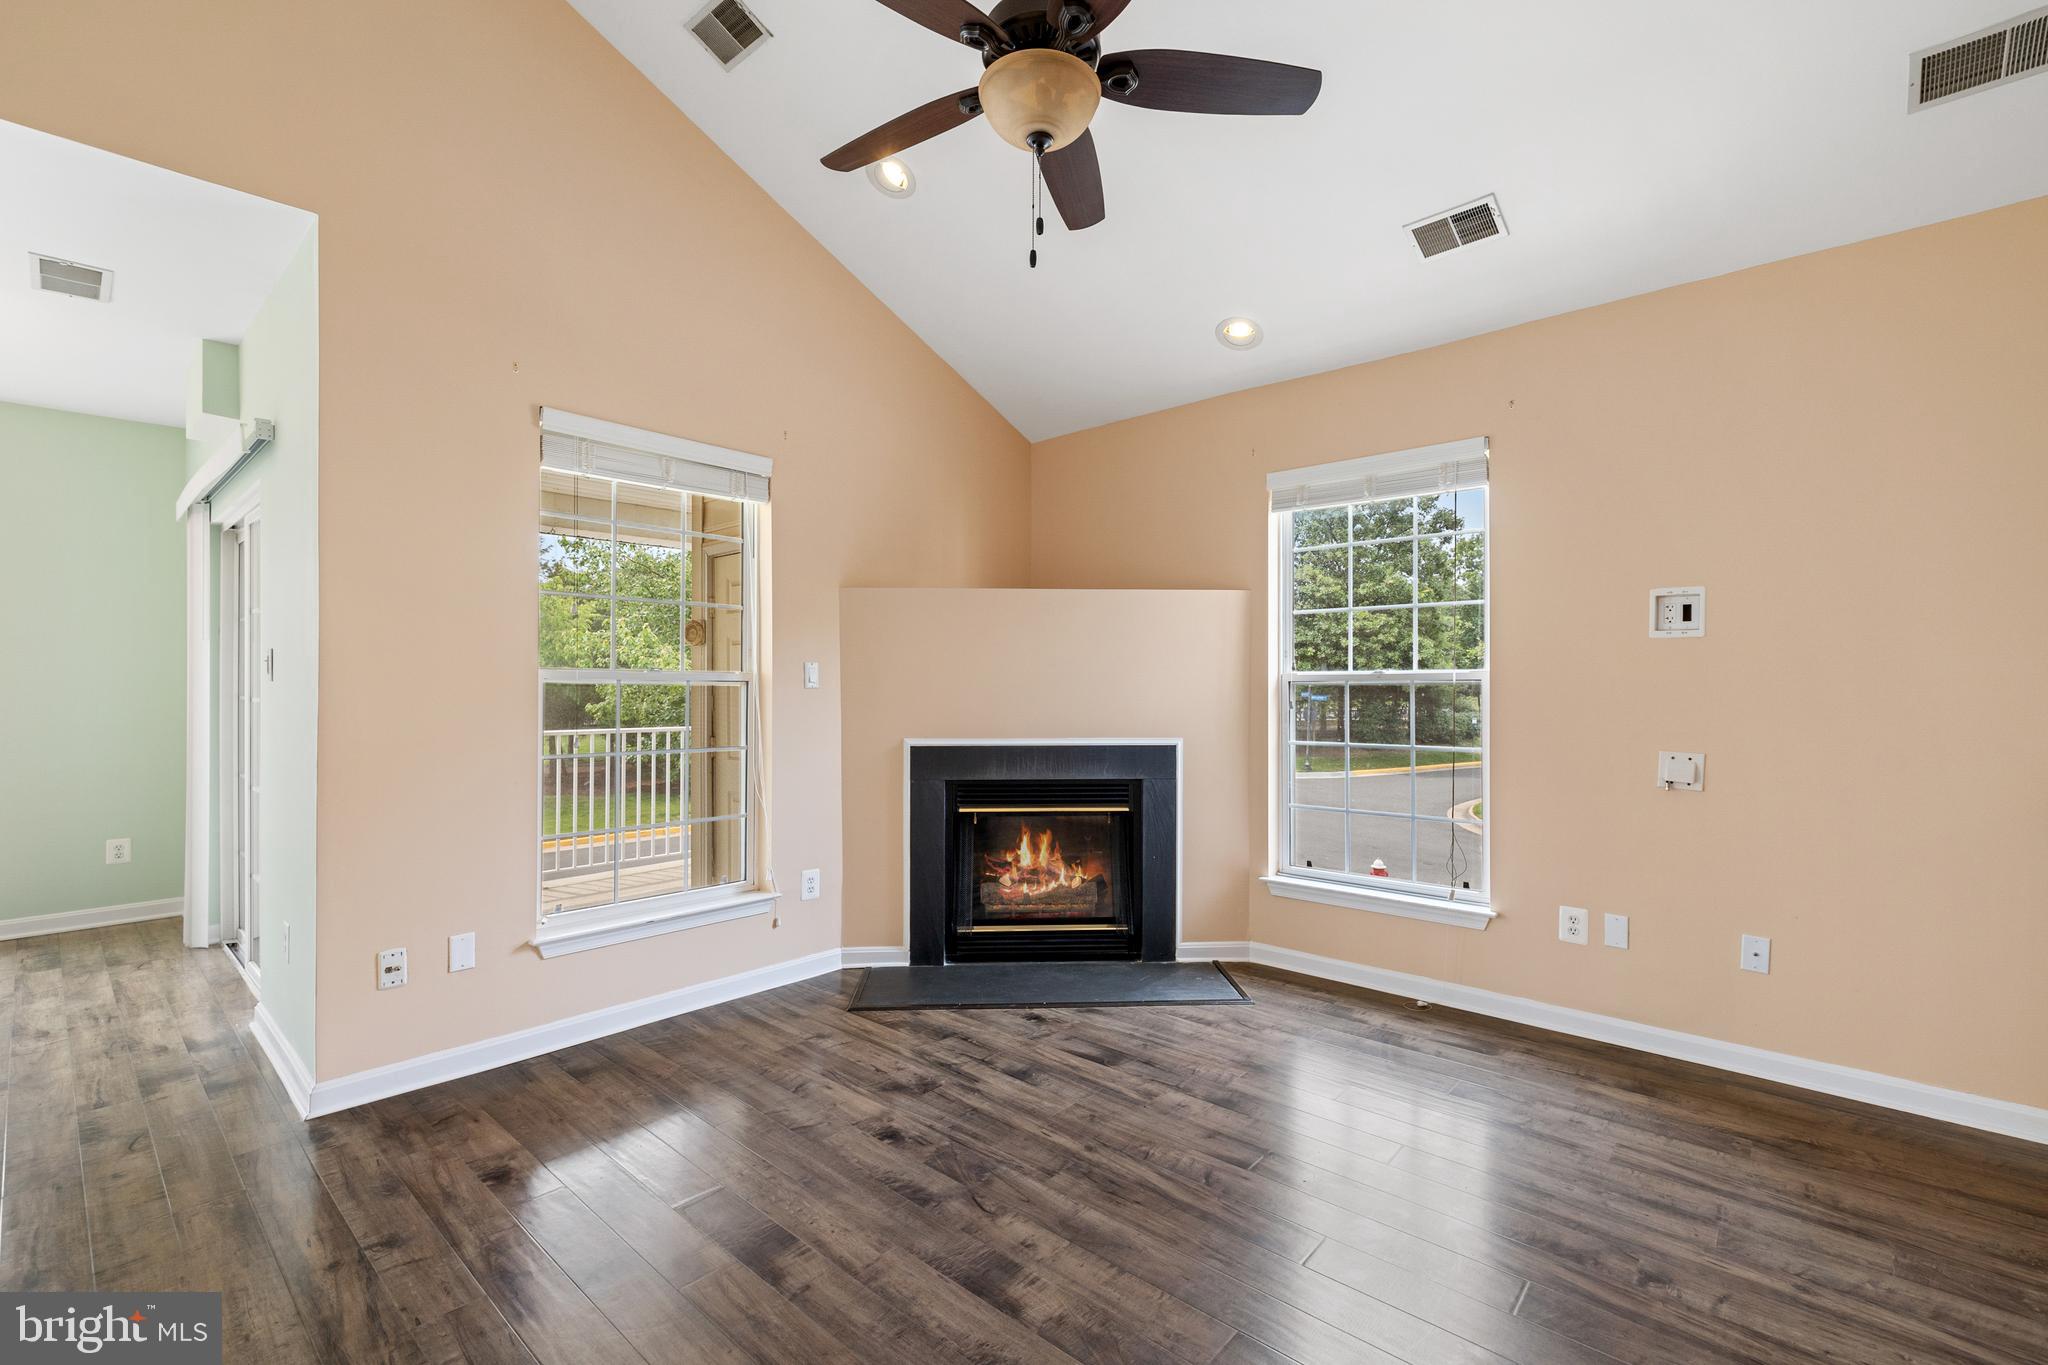 an empty room with windows fireplace and wooden floor